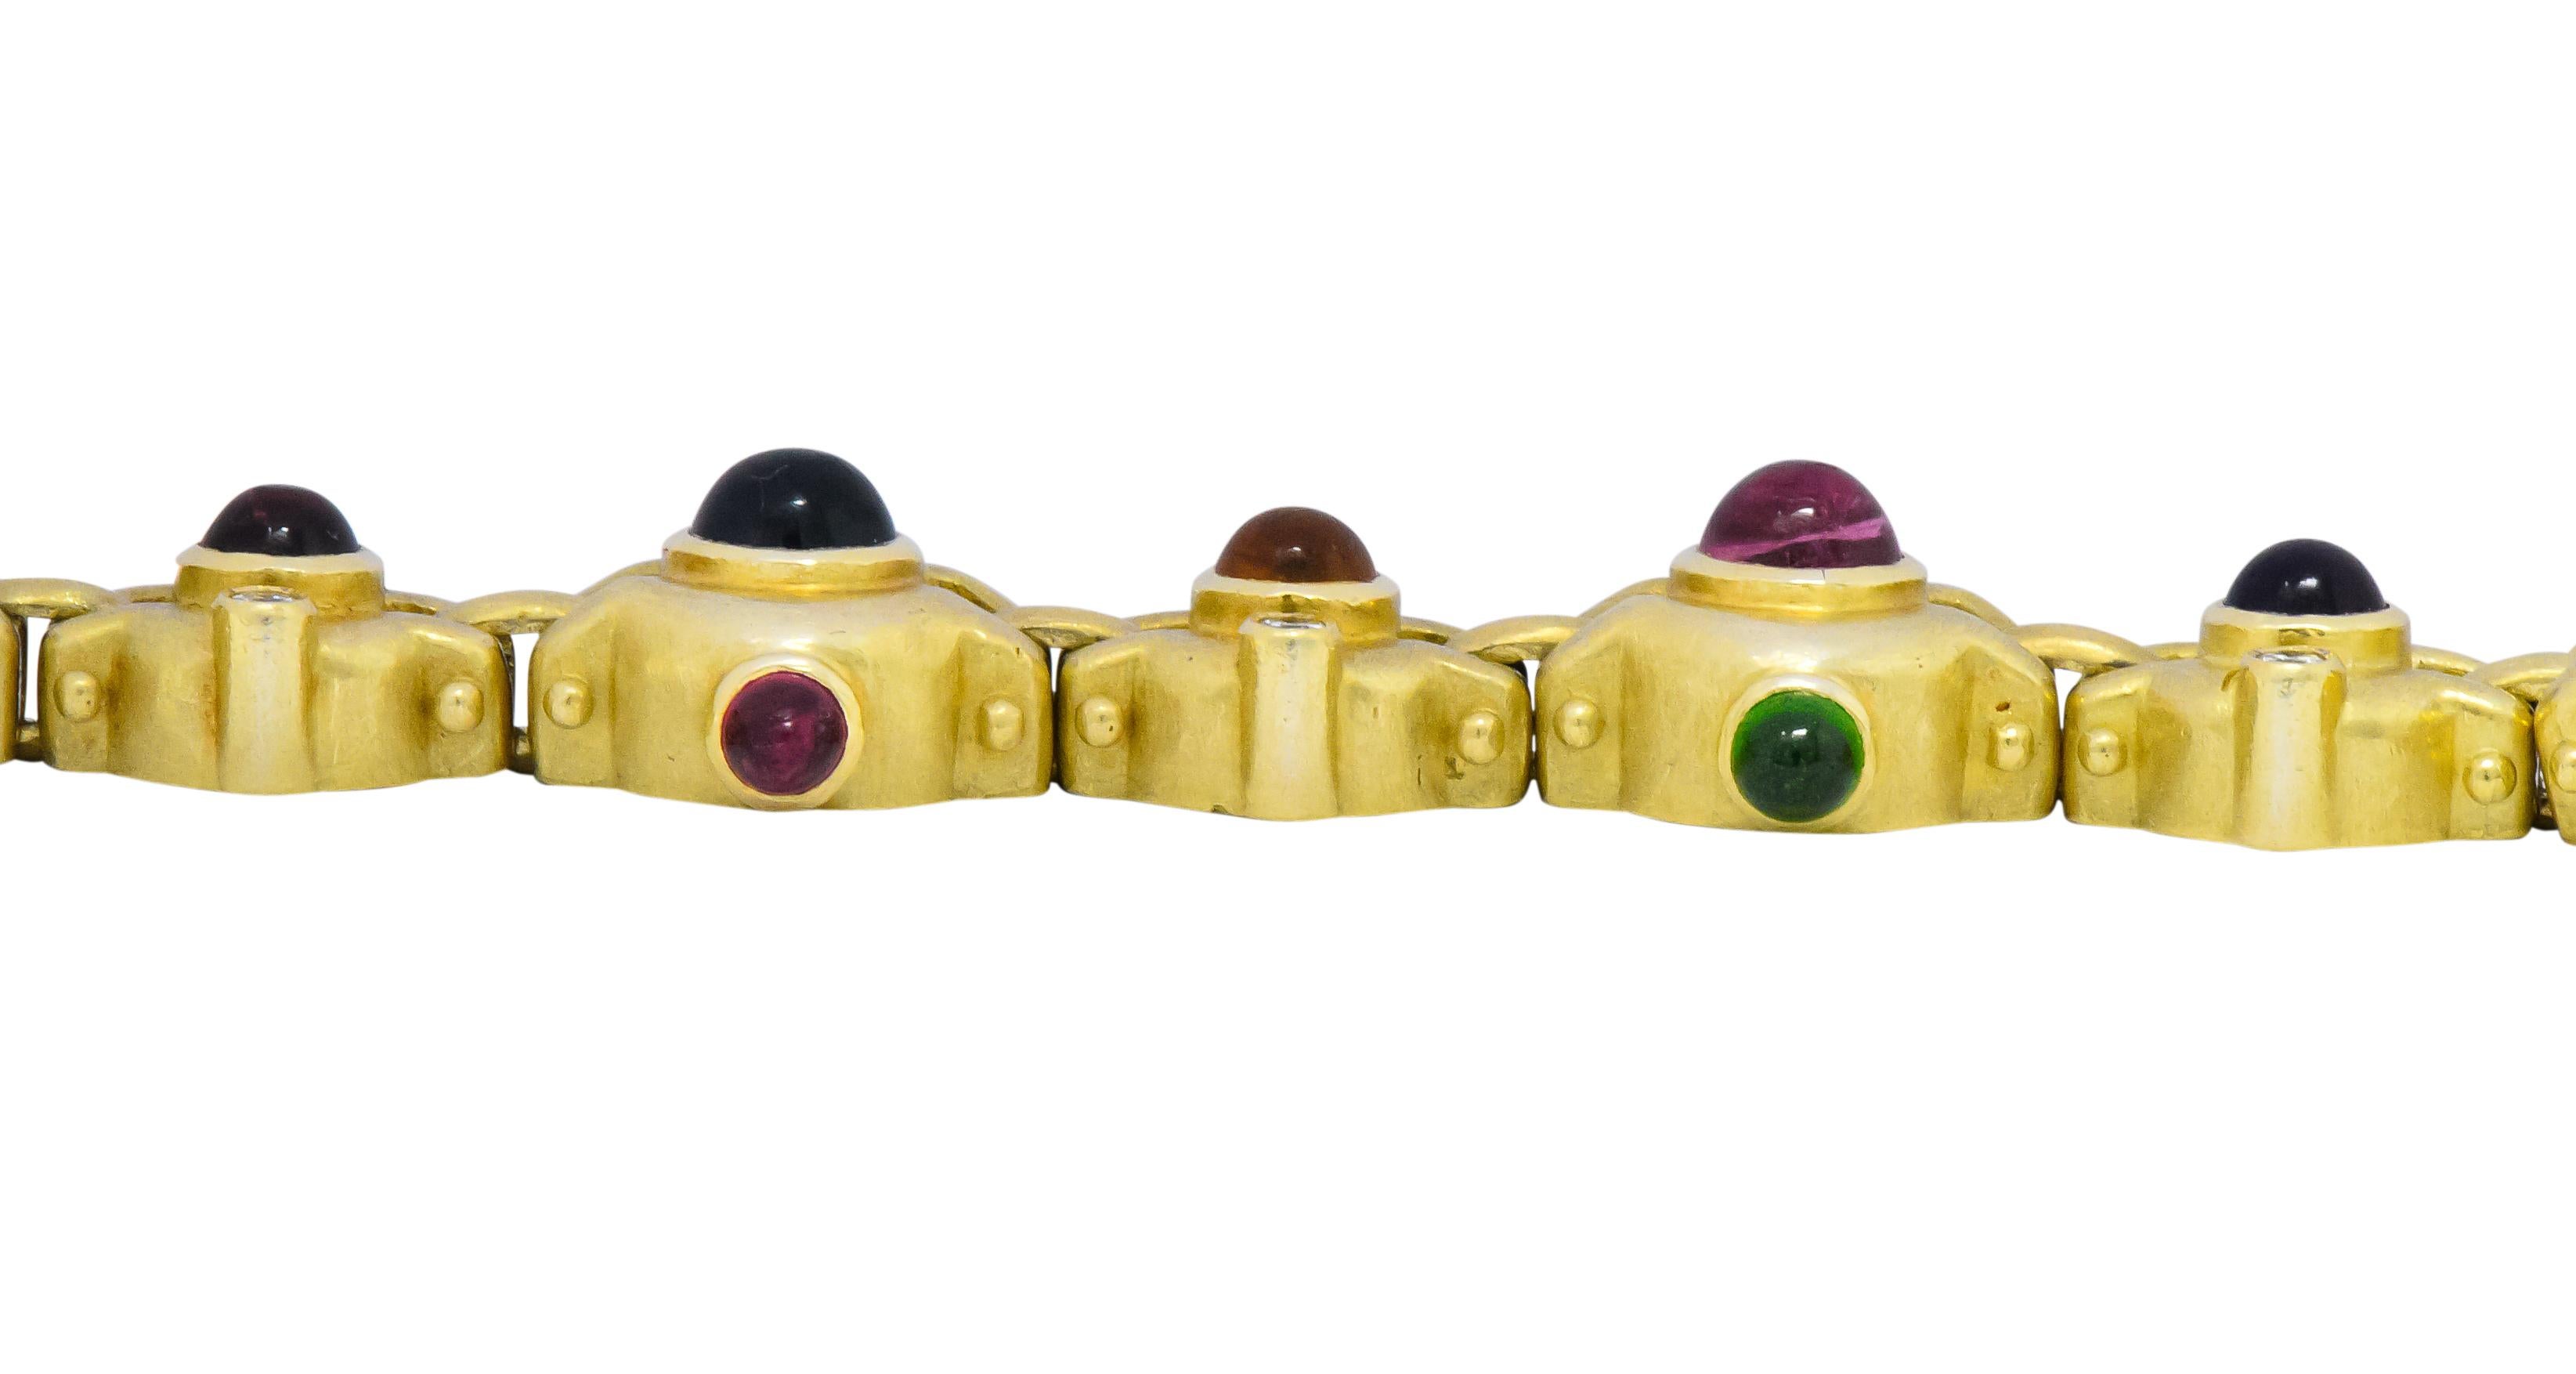 Each link centering a round cabochon gemstone with smaller round cabochon gemstone accents

Including amethyst, citrine, tourmaline, peridot and iolite

Accented by round brilliant cut diamonds, weighing approximately 0.50 carat total, G/H color and